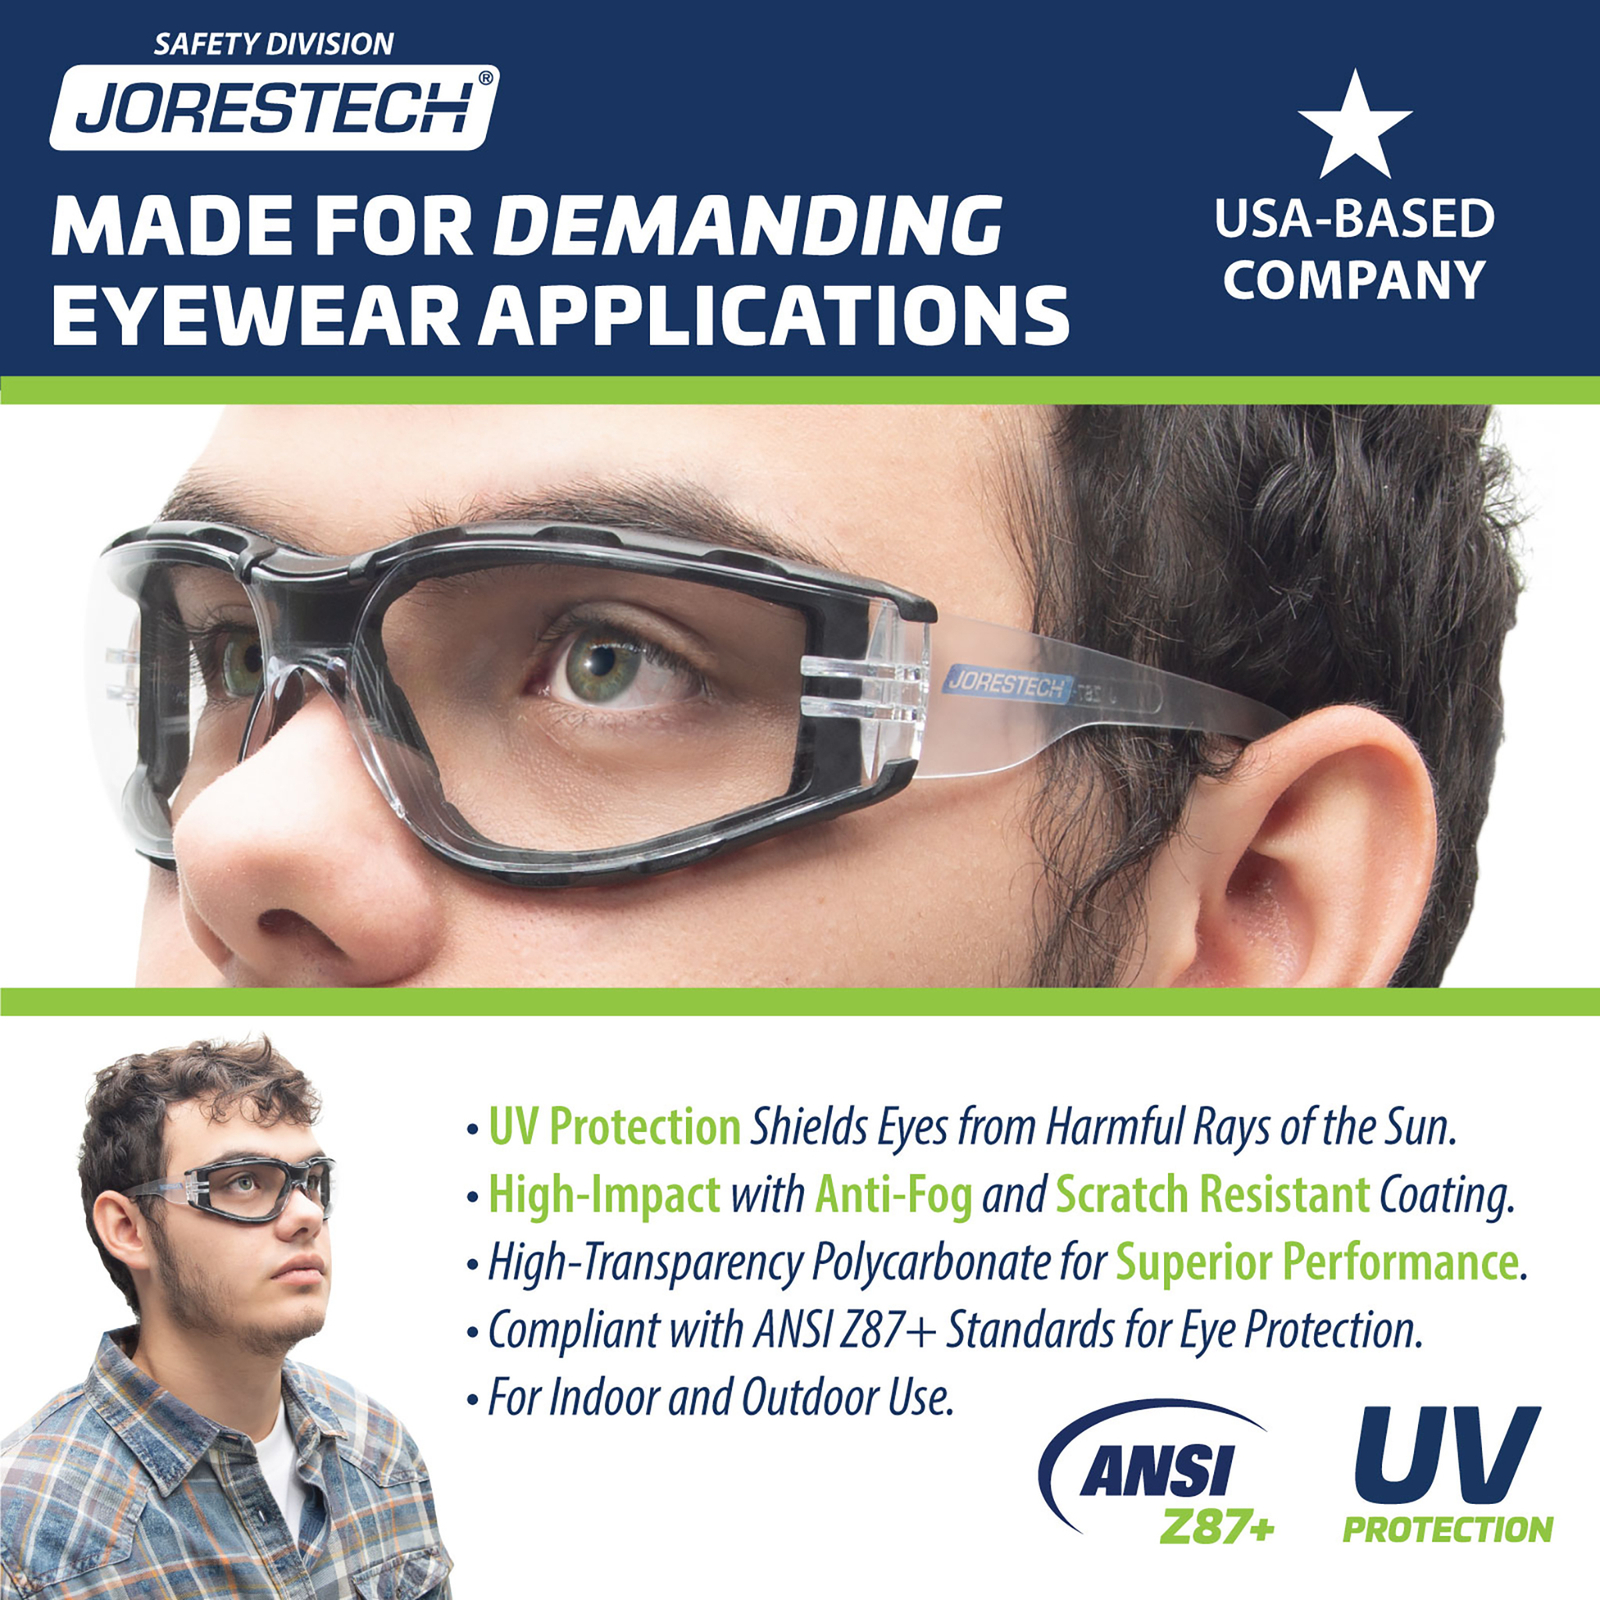 Worker wearing the JORESTECH Safety Glasses for high impact protection with foam gasket. Information reads: Made for demanding eyewear applications. A USA Base Company. UV Protection shield eyes from harmful rays of the Sun. High Impact with anti-fog and scratch resistant coating. High transparency polycarbonate for superior performance. For indoors and outdoor use. ANSI Z87+compliant and UV protection.